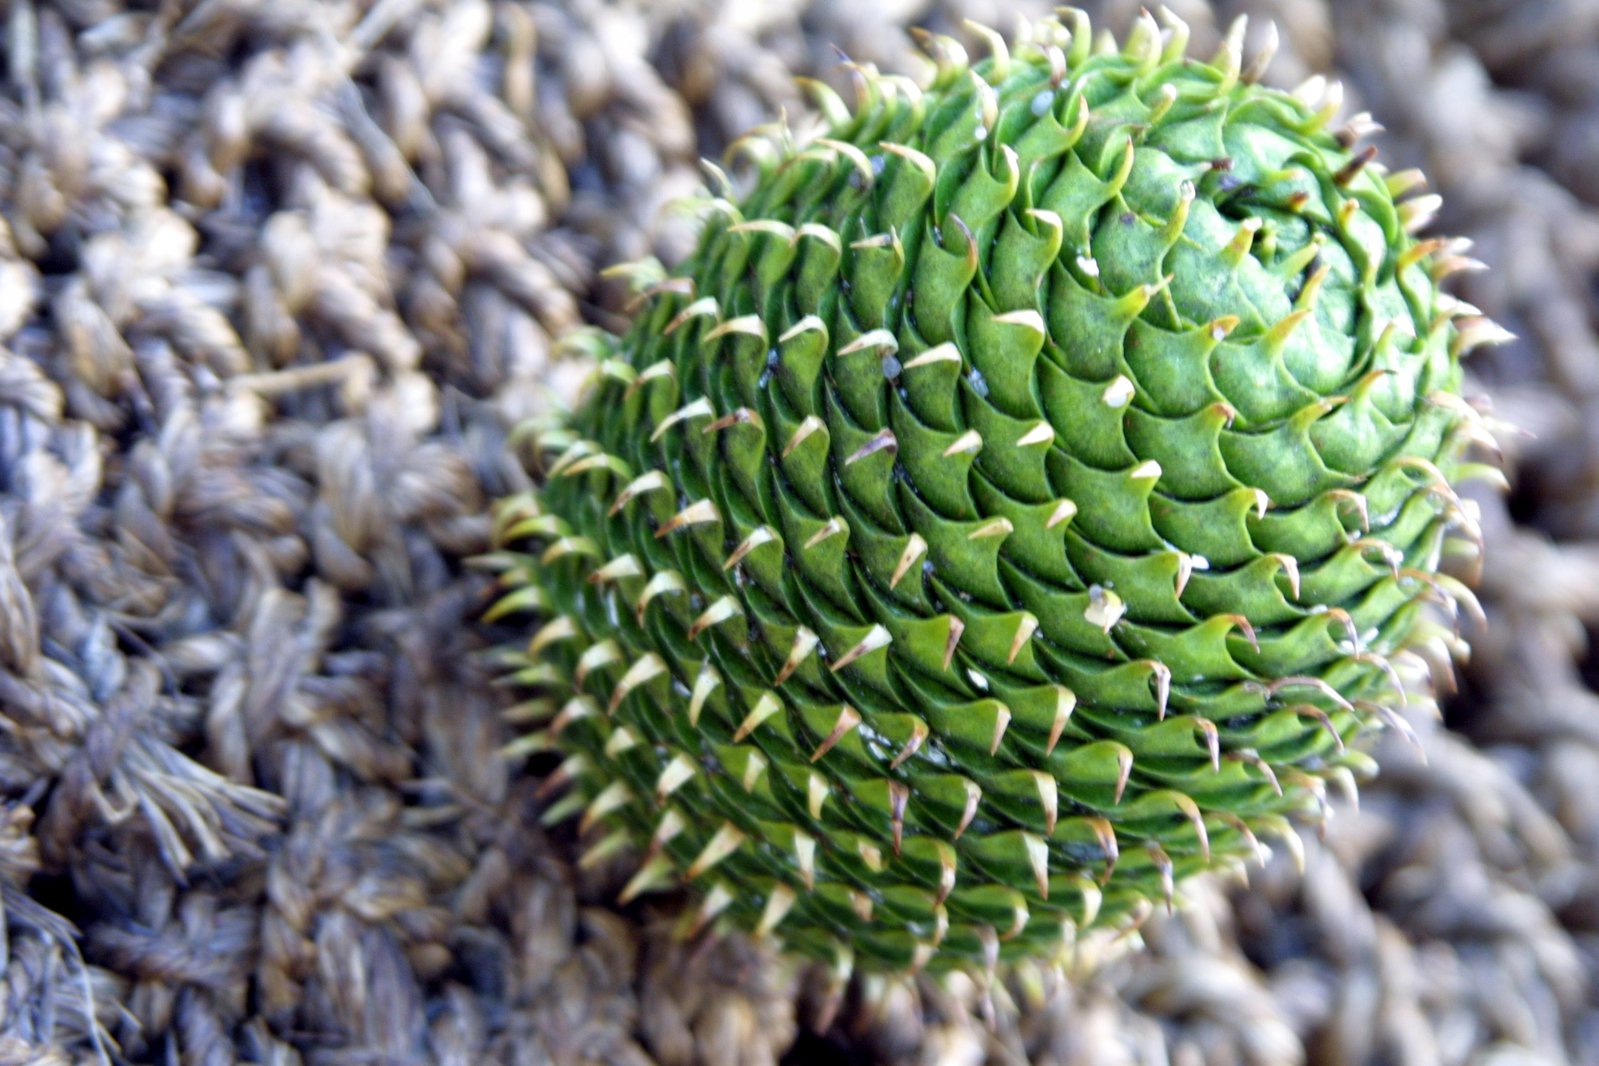 an unusual green object with spikes on its shell